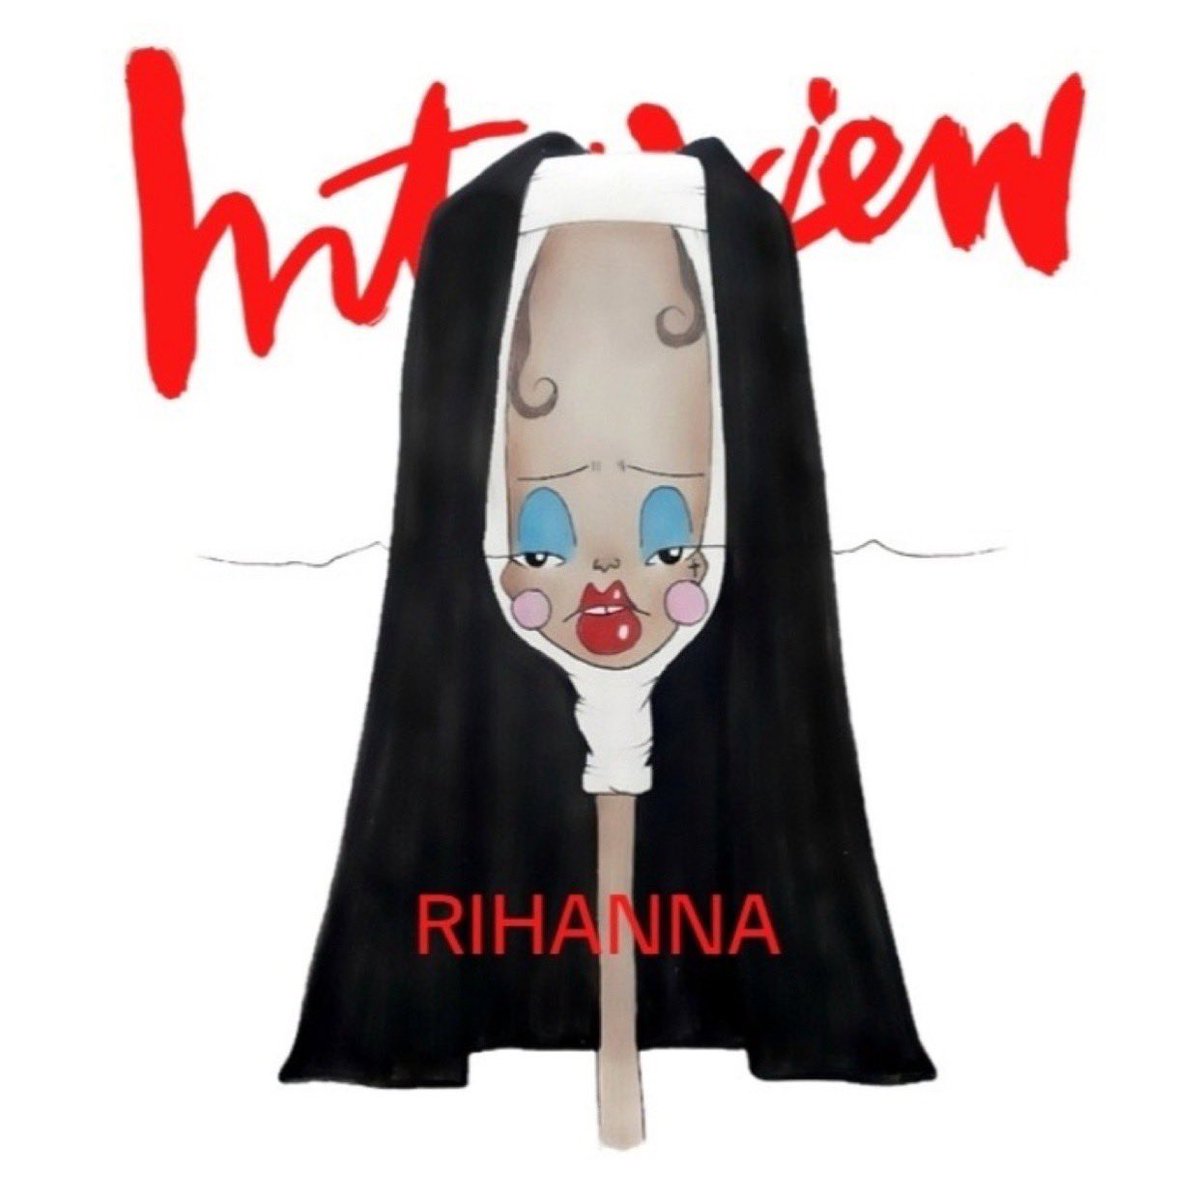 Inspired by @rihanna cover for @InterviewMag shot by @nadialeecohen ♥️

#art #artist #draw #drawing #illustration #illustrator #fashionillustration #fashionillustrator #journal #artjournal #sketch #sketchbook #rihanna #magazine #interviewmag
 instagram.com/p/C5nzd1Gtw-d/…